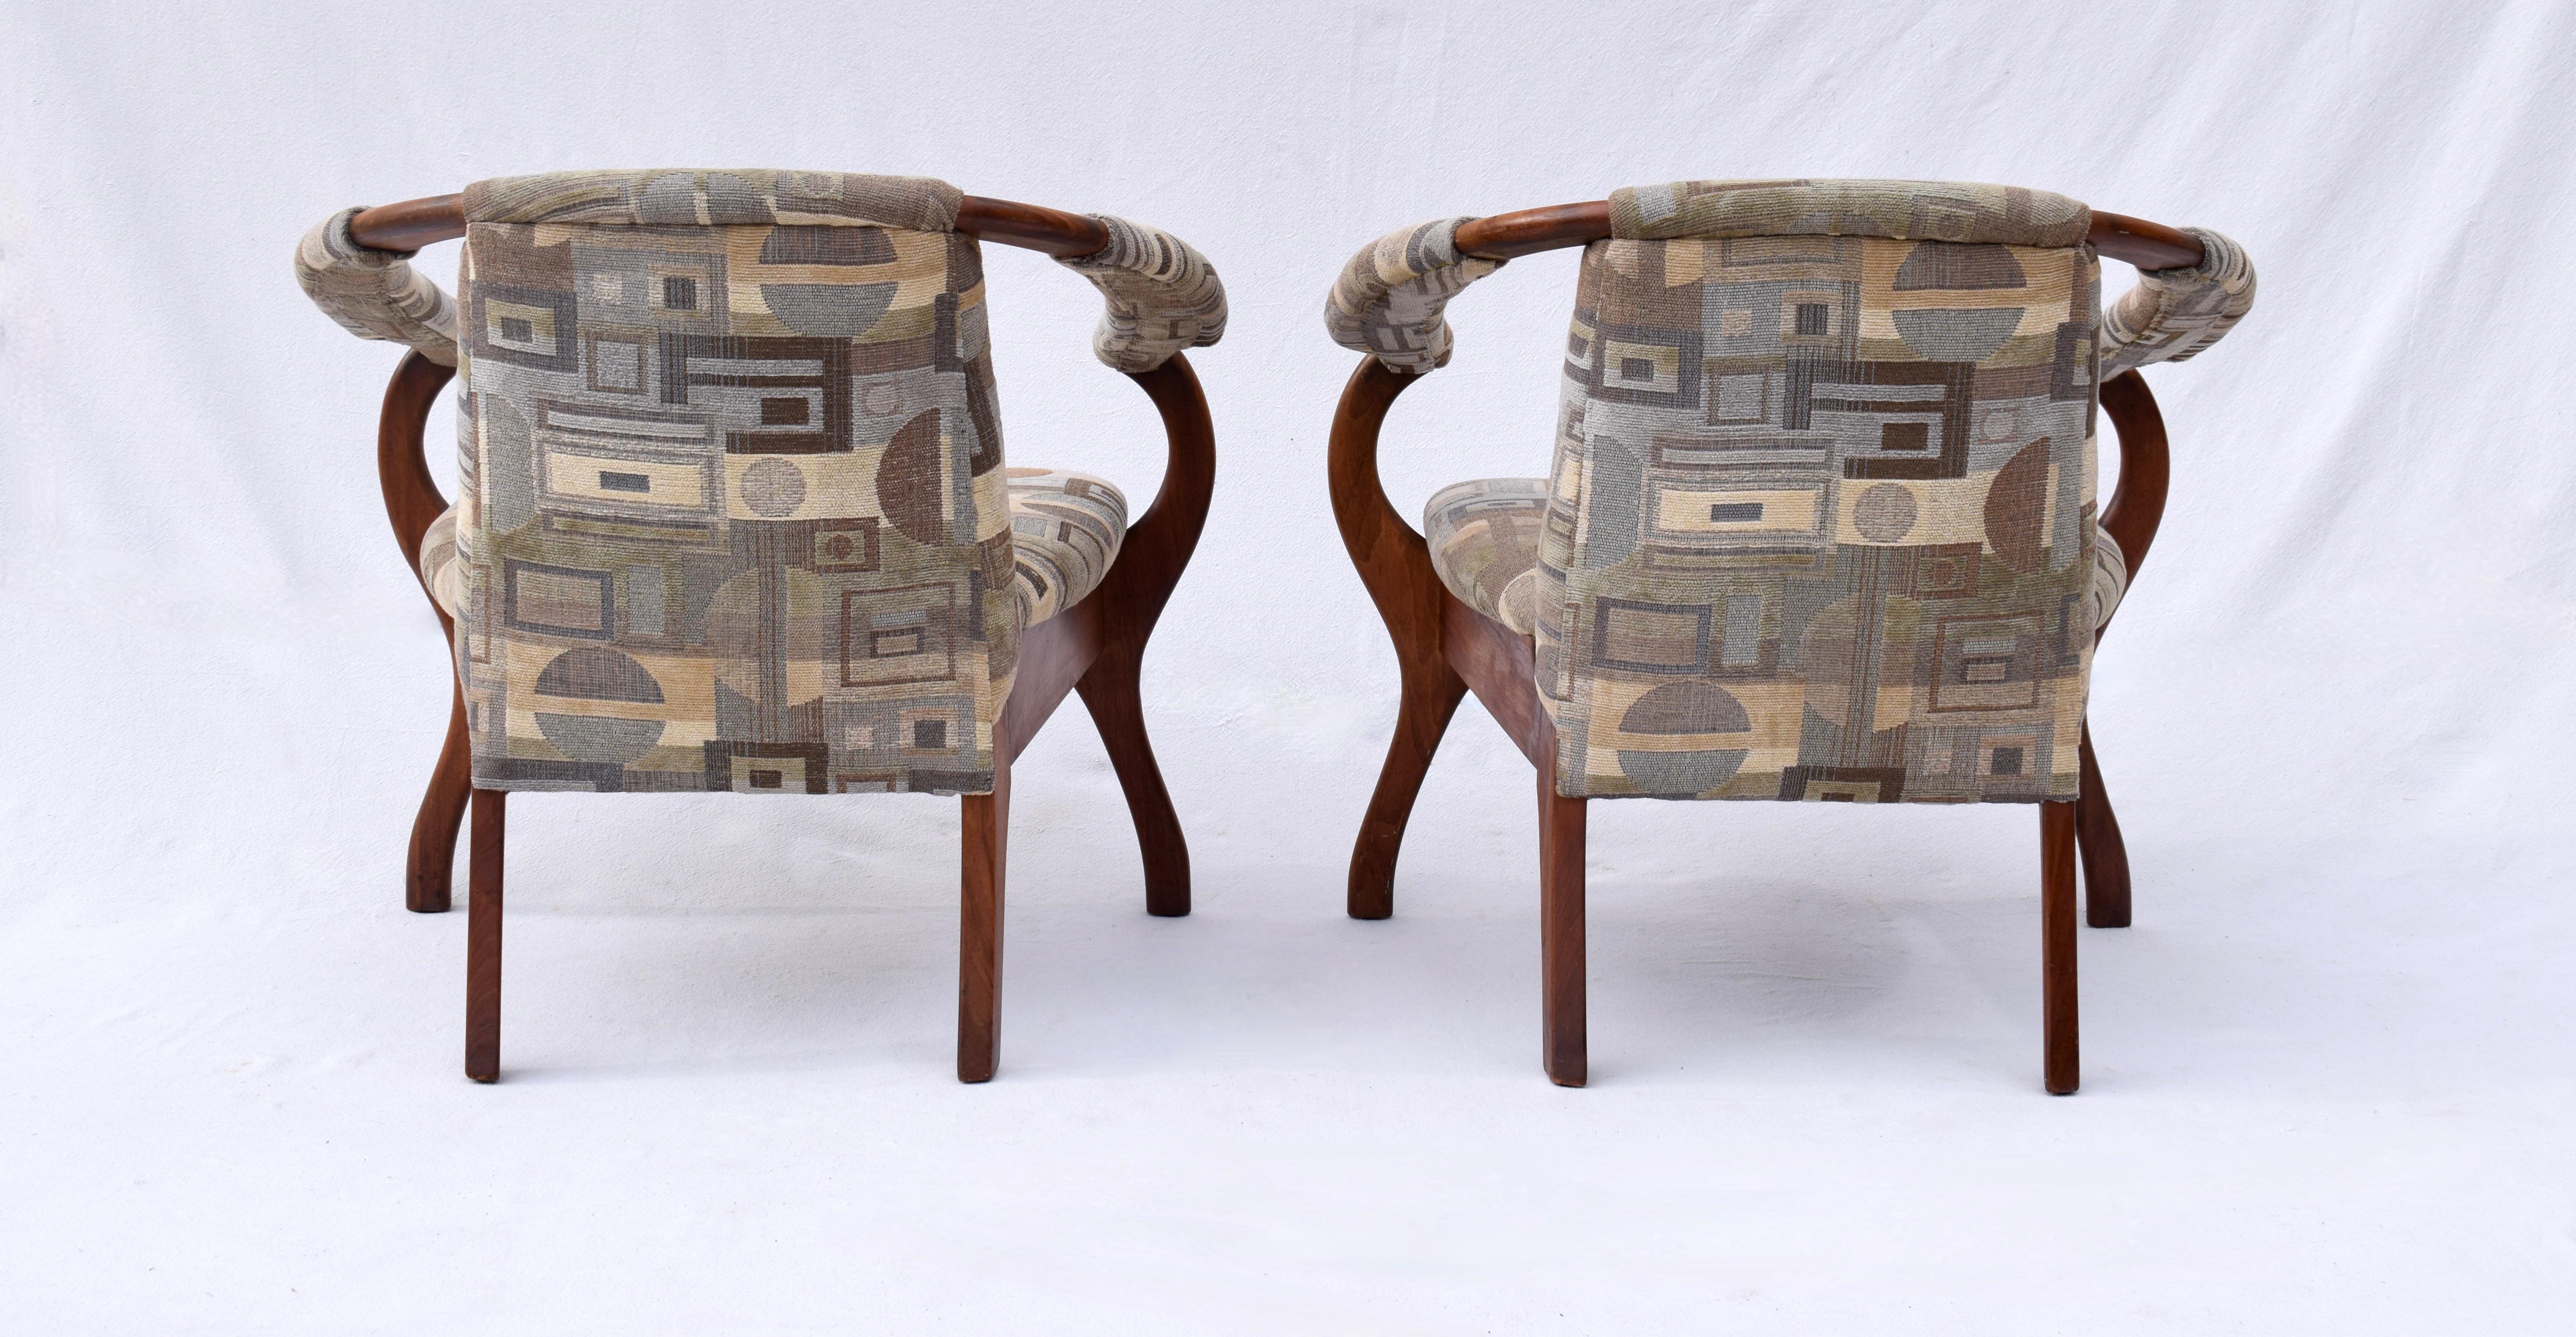 Upholstery Modern Sculptural Arm Chairs Attributed to Adrian Pearsall For Sale